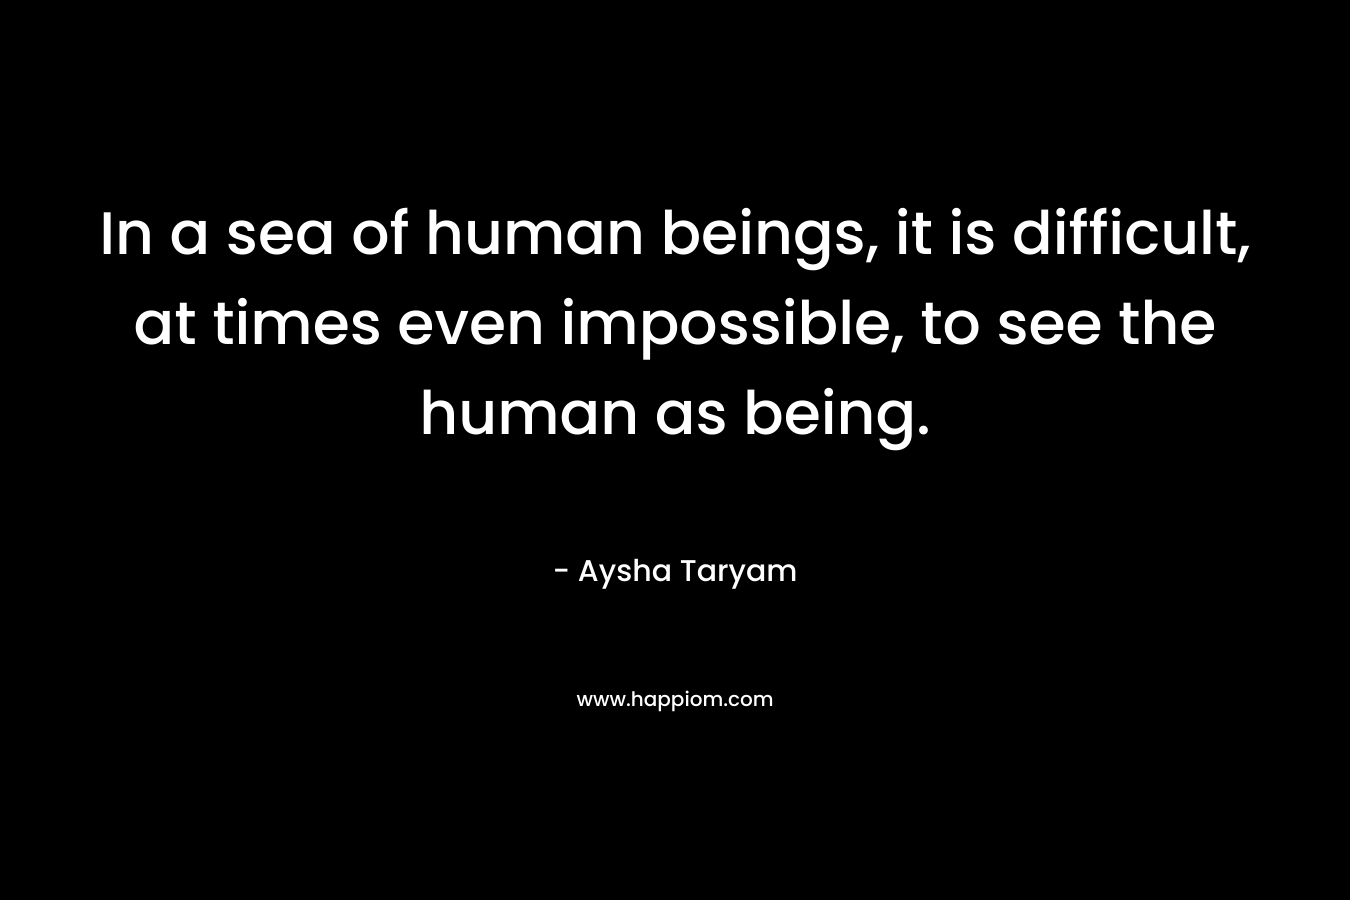 In a sea of human beings, it is difficult, at times even impossible, to see the human as being.